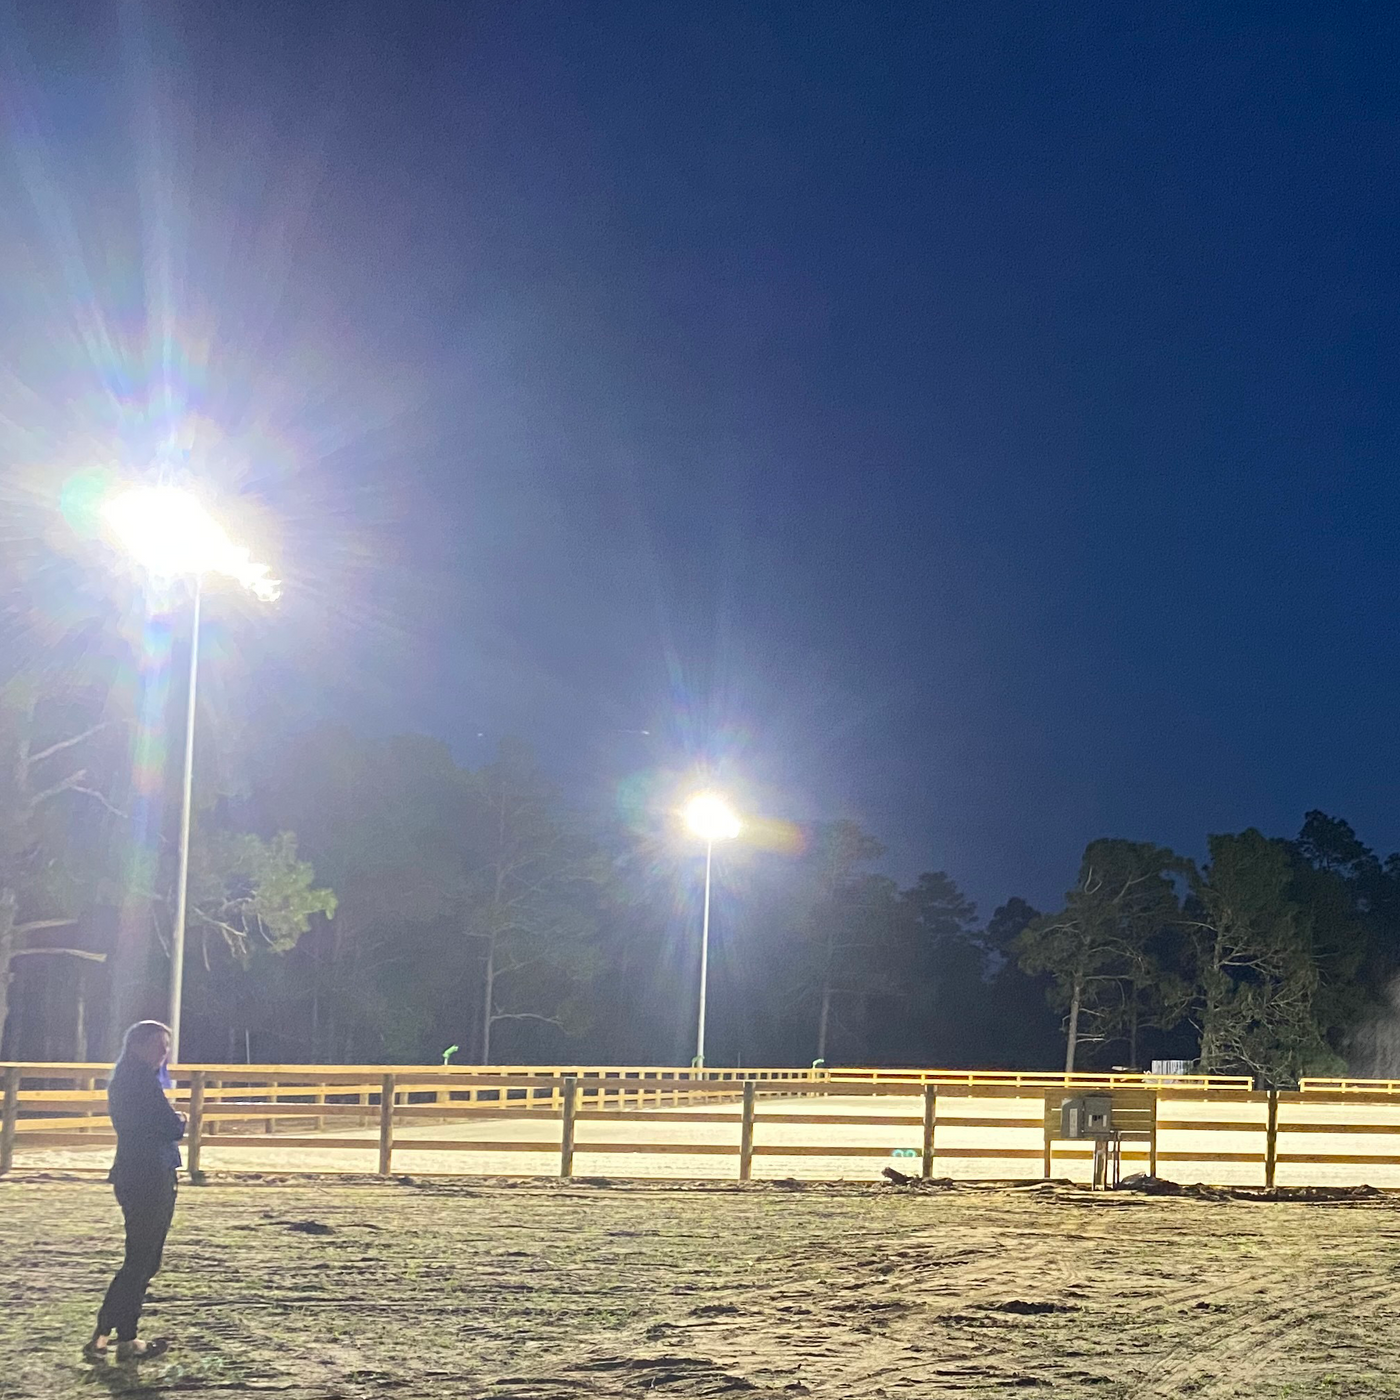 440w Sports Lighter LED Fixtures for Private Equestrian Riding Arena